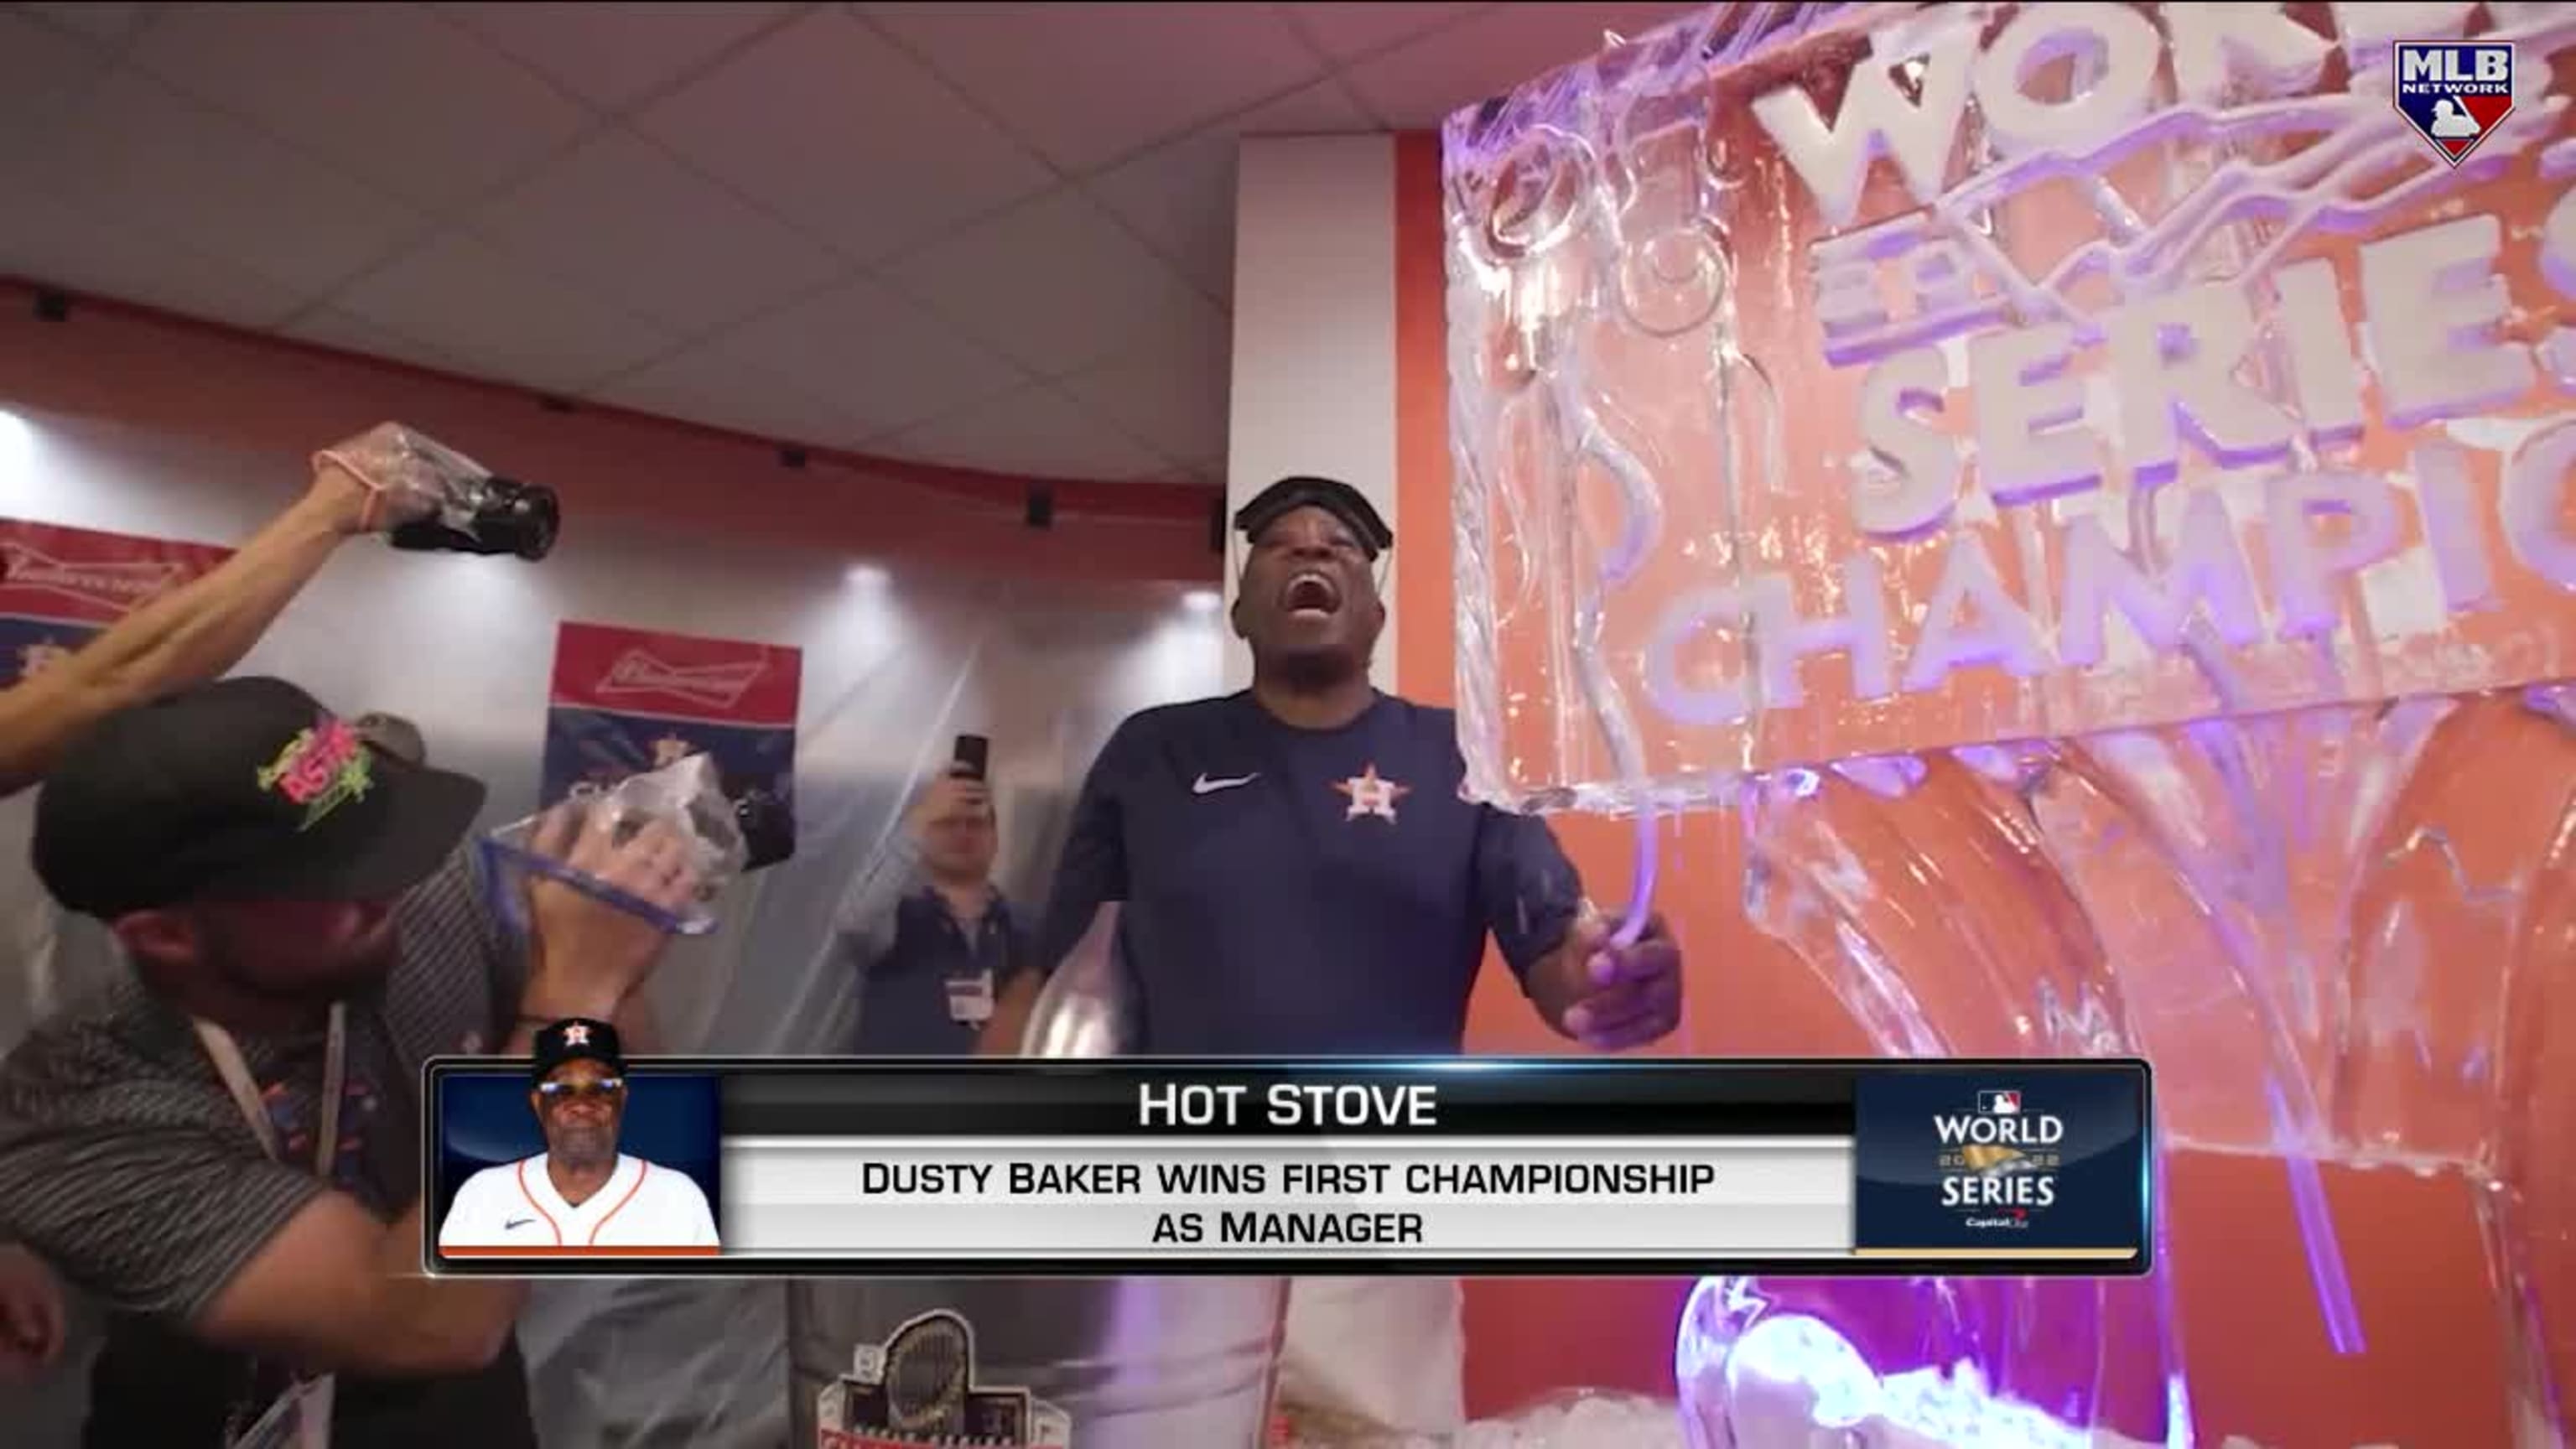 At World Series, Houston Manager Dusty Baker Goes For Title